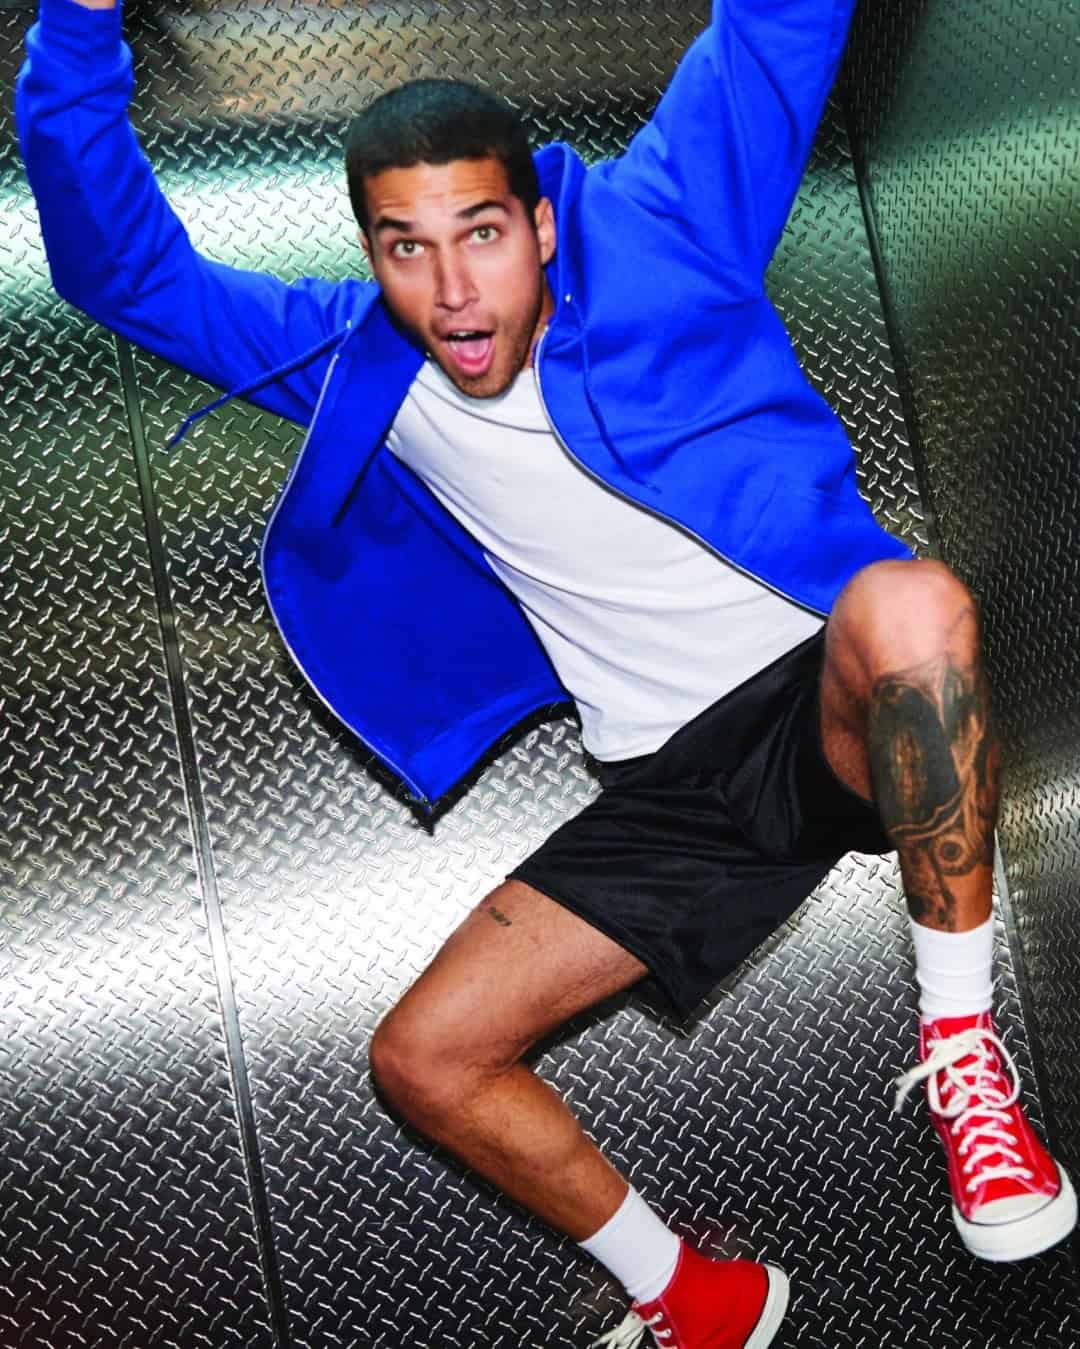 man jumping wearing a blue hoodie and black shorts